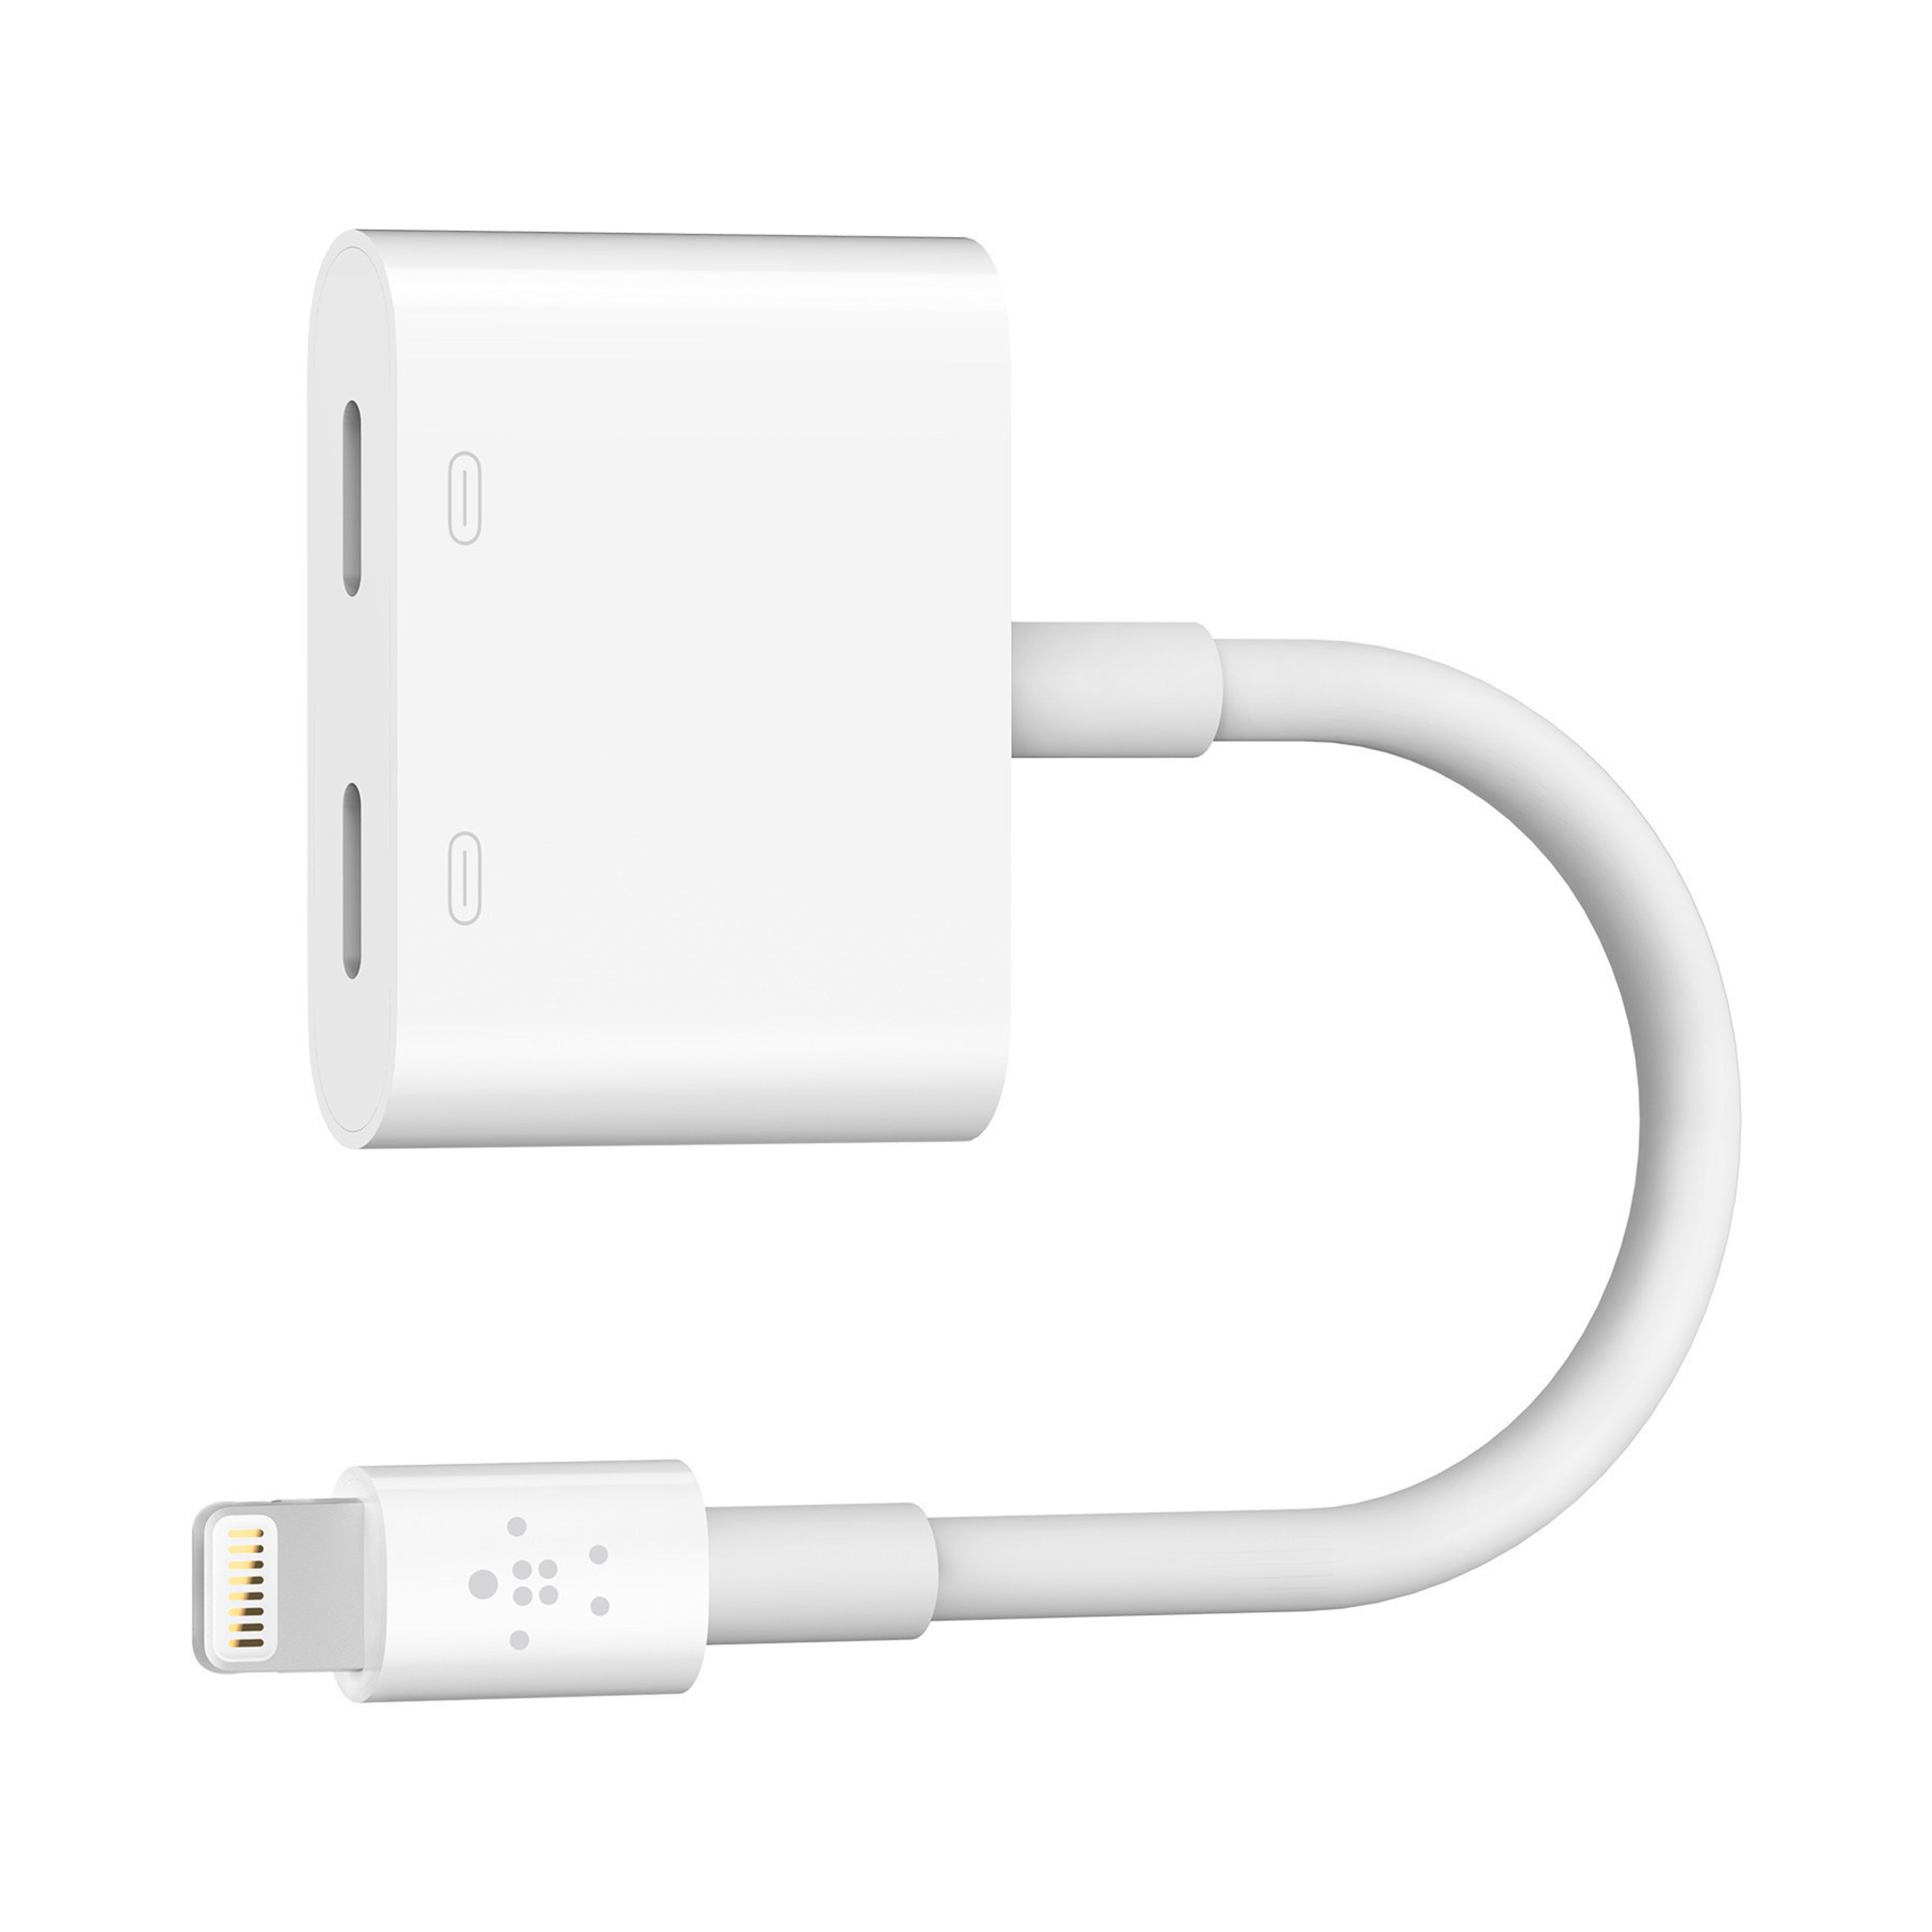 Belkin worked with Apple to develop the Lightning Audio + Charge RockStar(TM) to enable simultaneous charging and listening